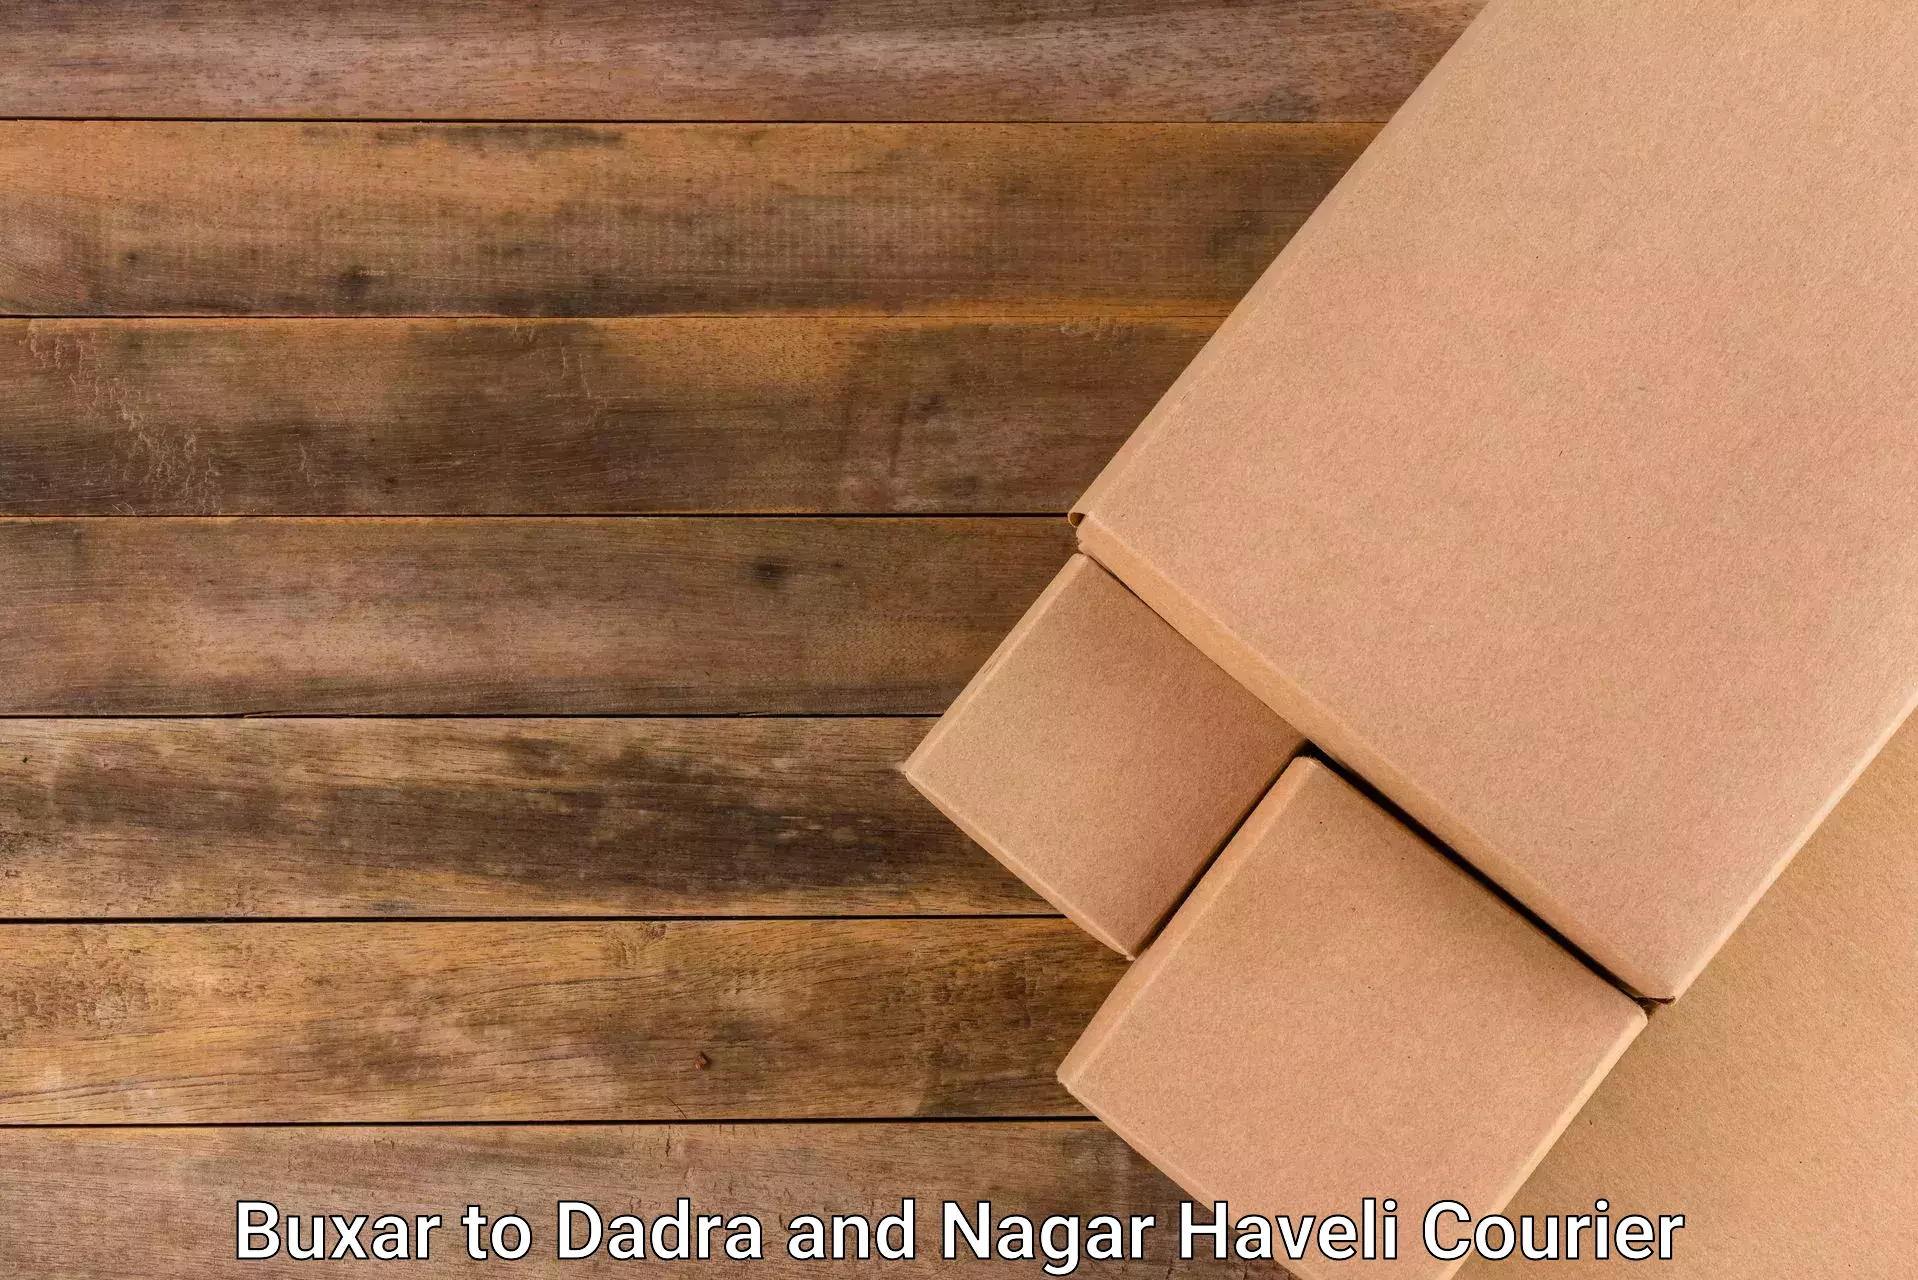 Next-day freight services Buxar to Dadra and Nagar Haveli